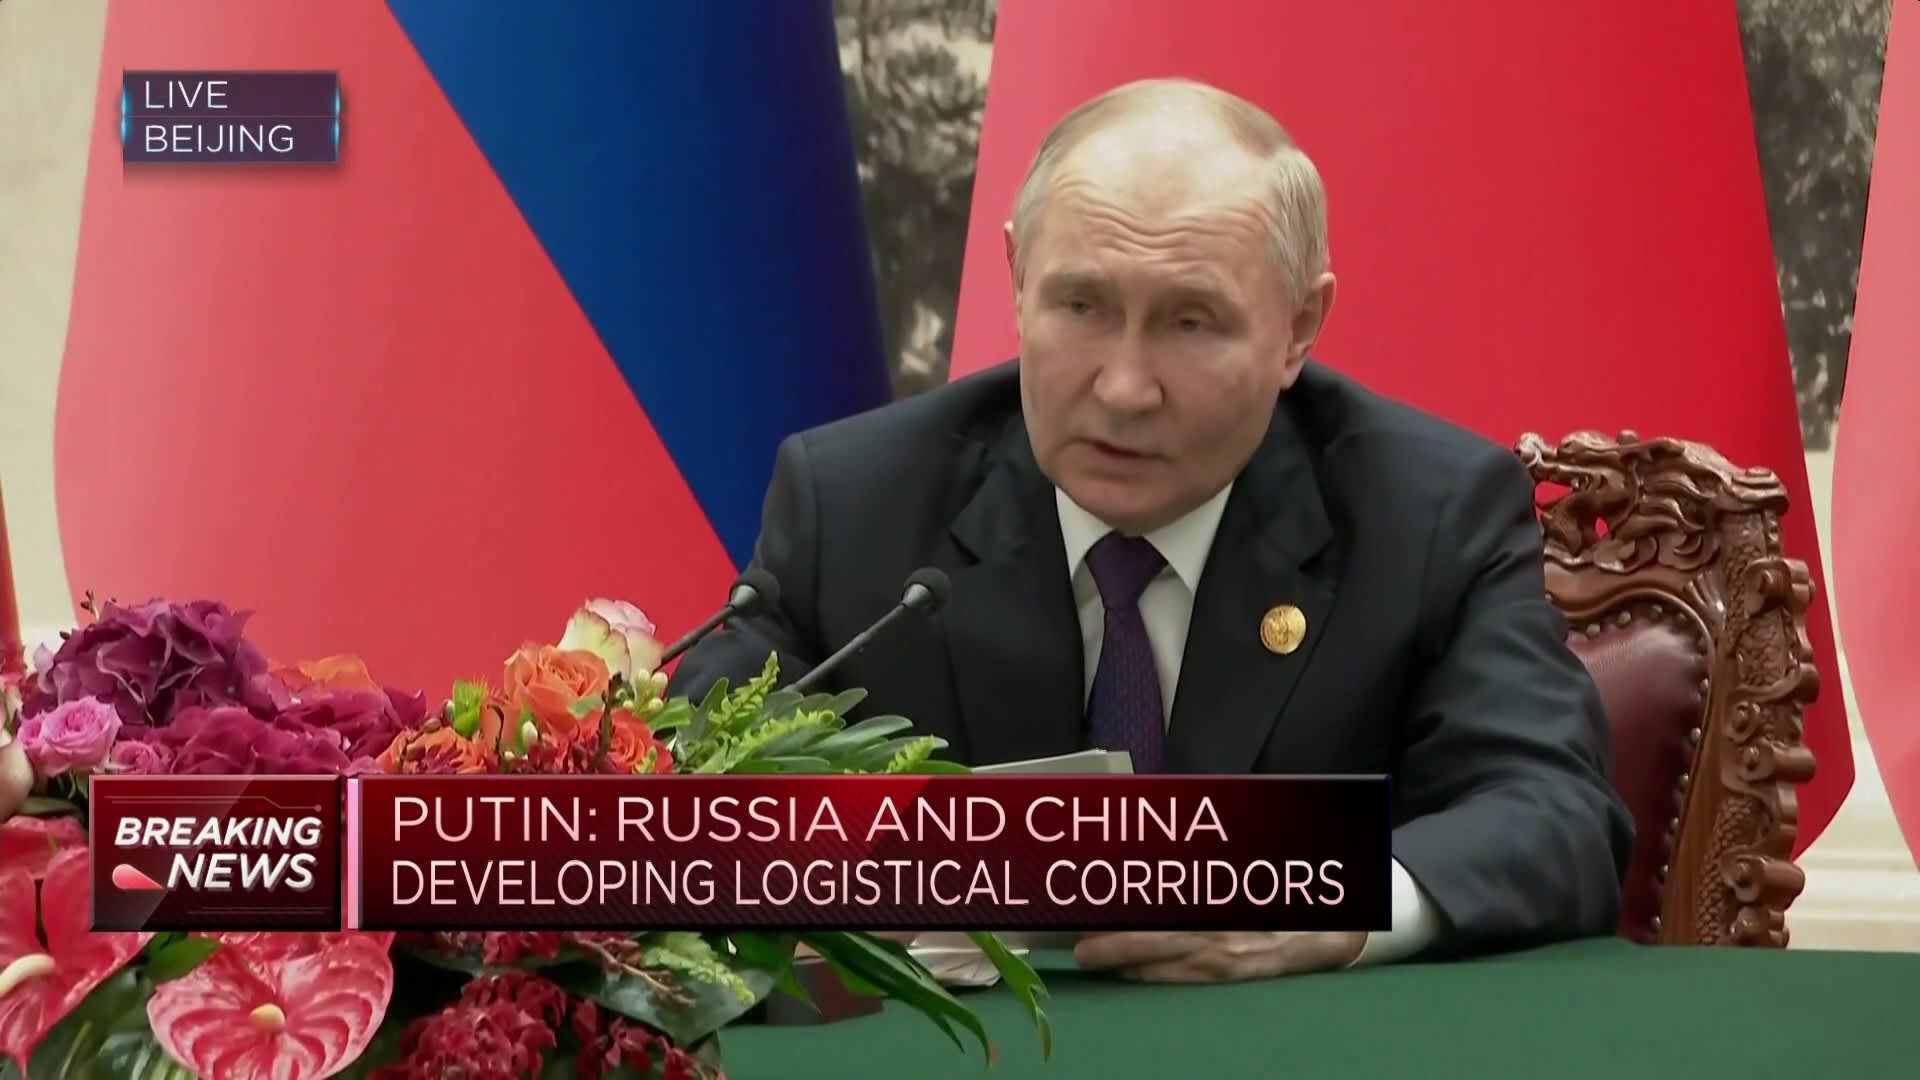 Russia to deepen nuclear cooperation with China, Putin says in Beijing [Video]